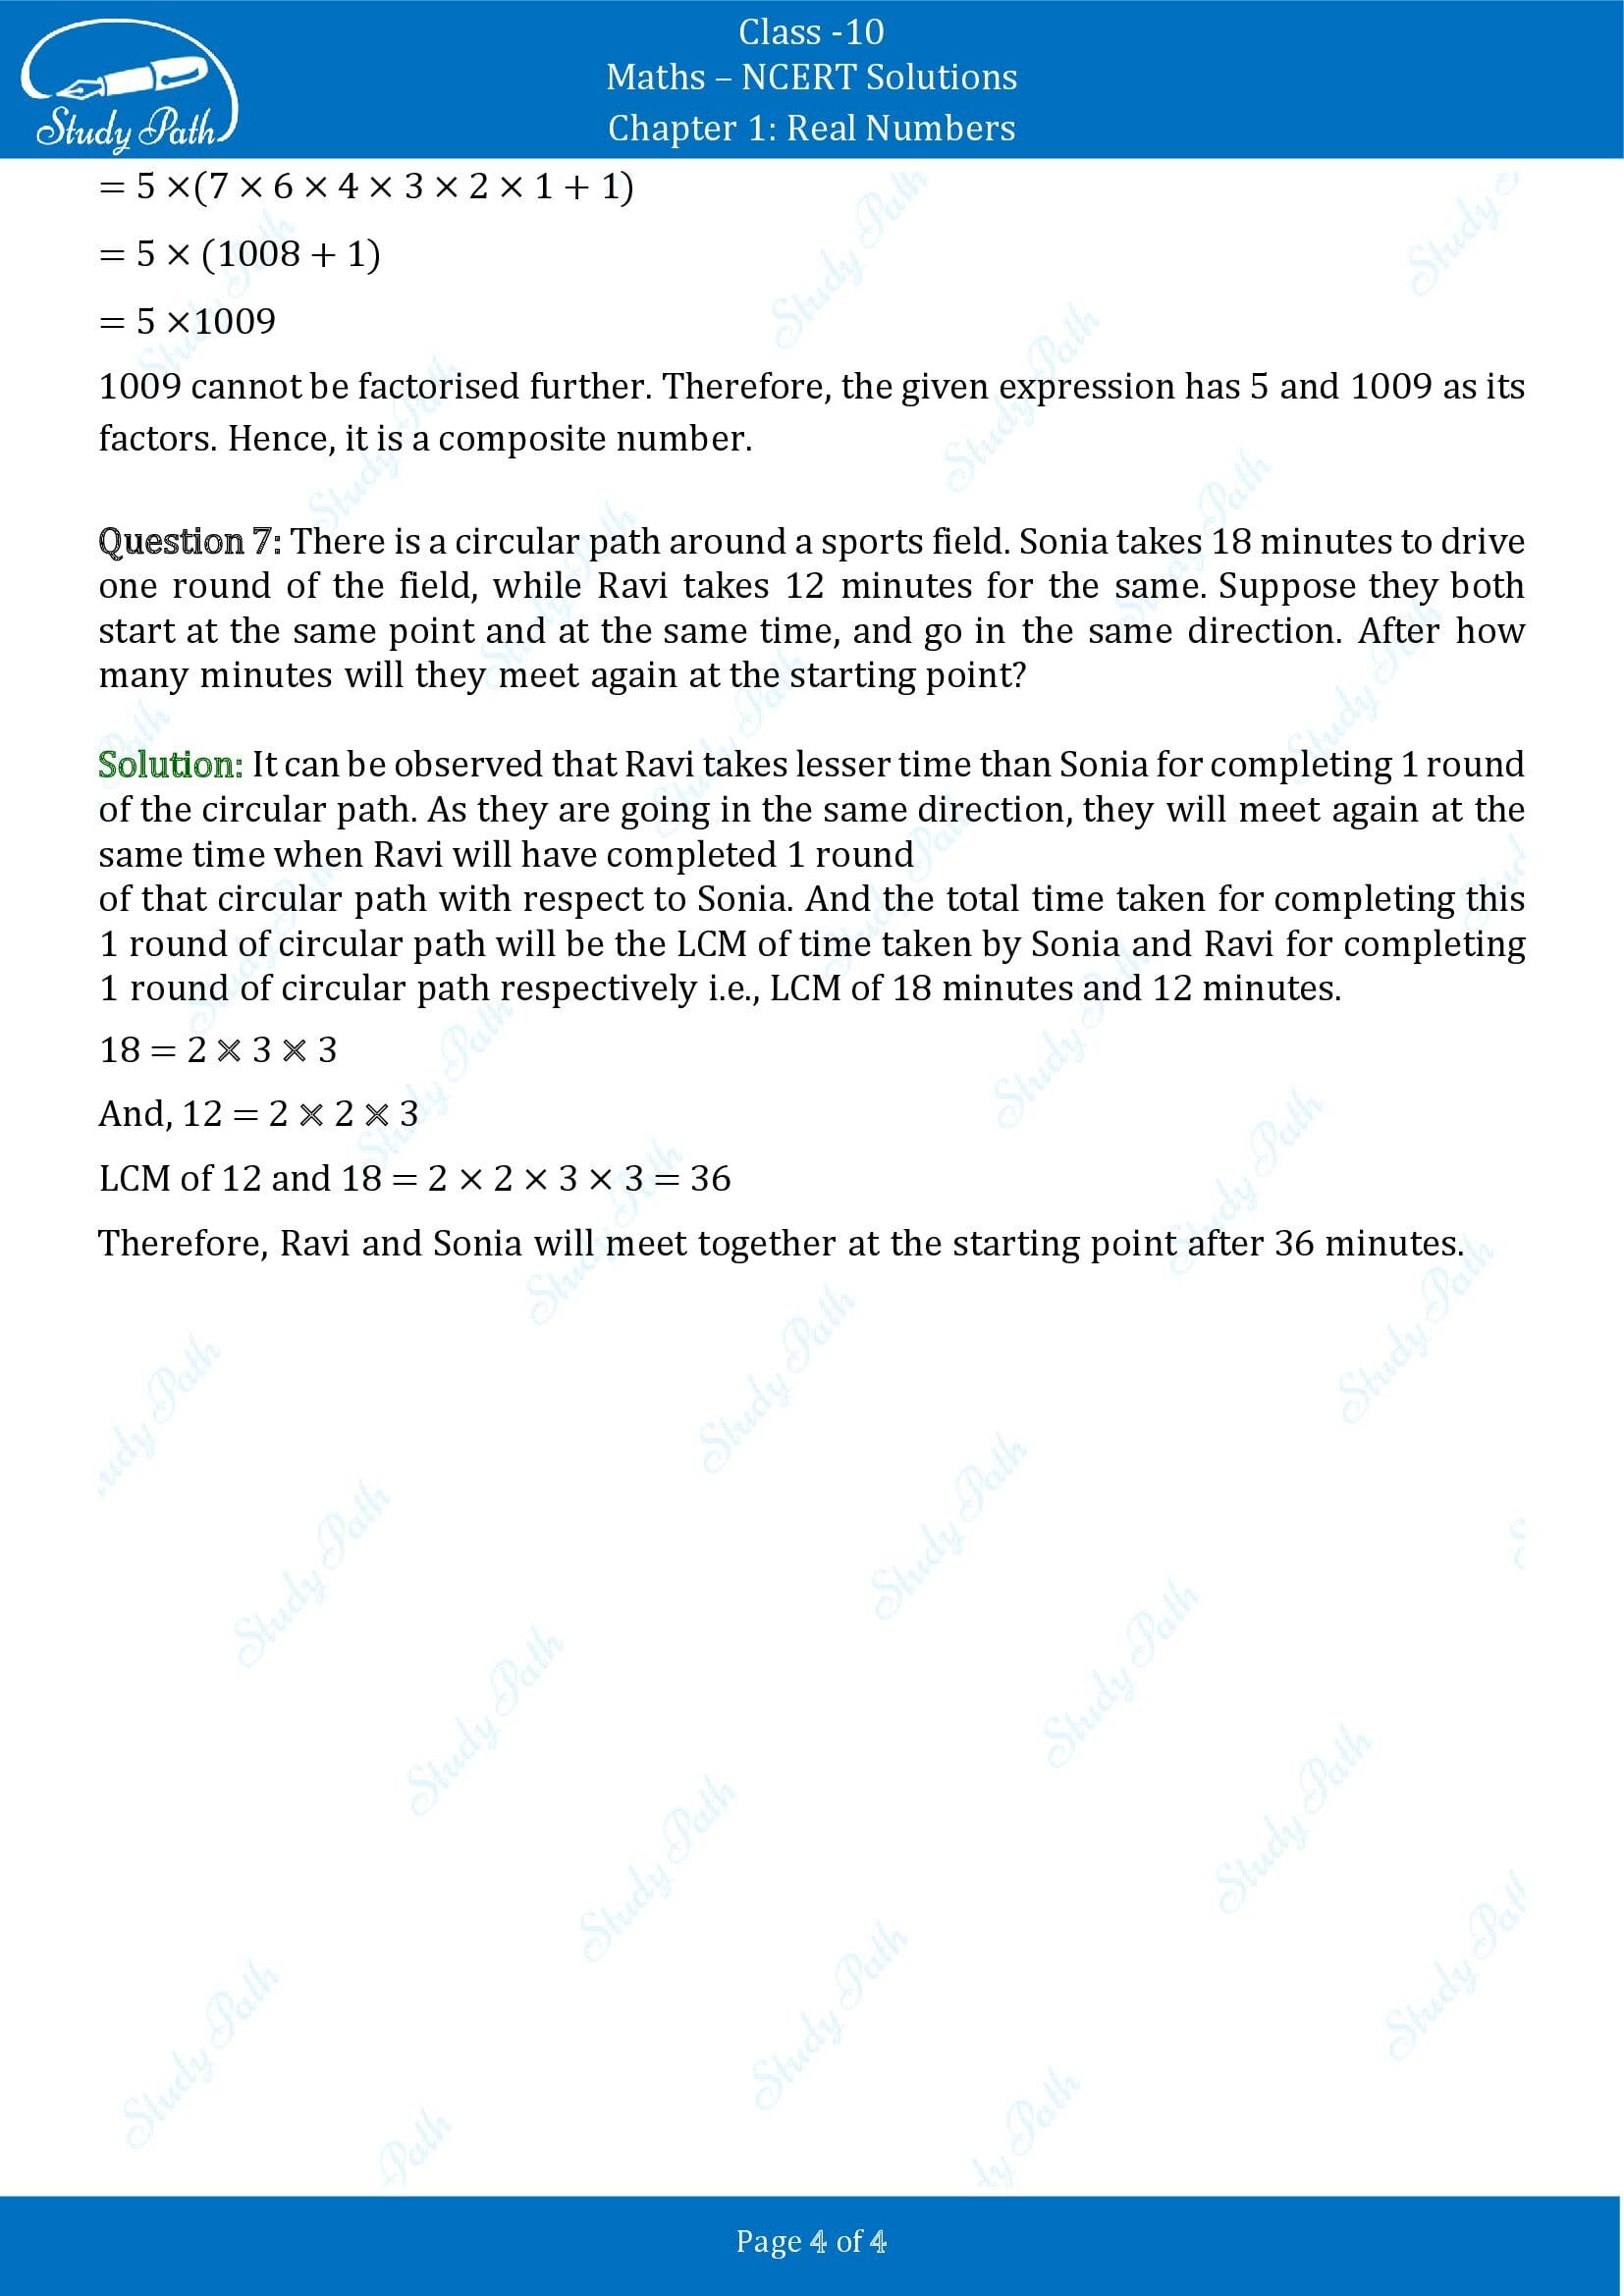 NCERT Solutions for Class 10 Maths Chapter 1 Real Numbers Exercise 1.2 00004